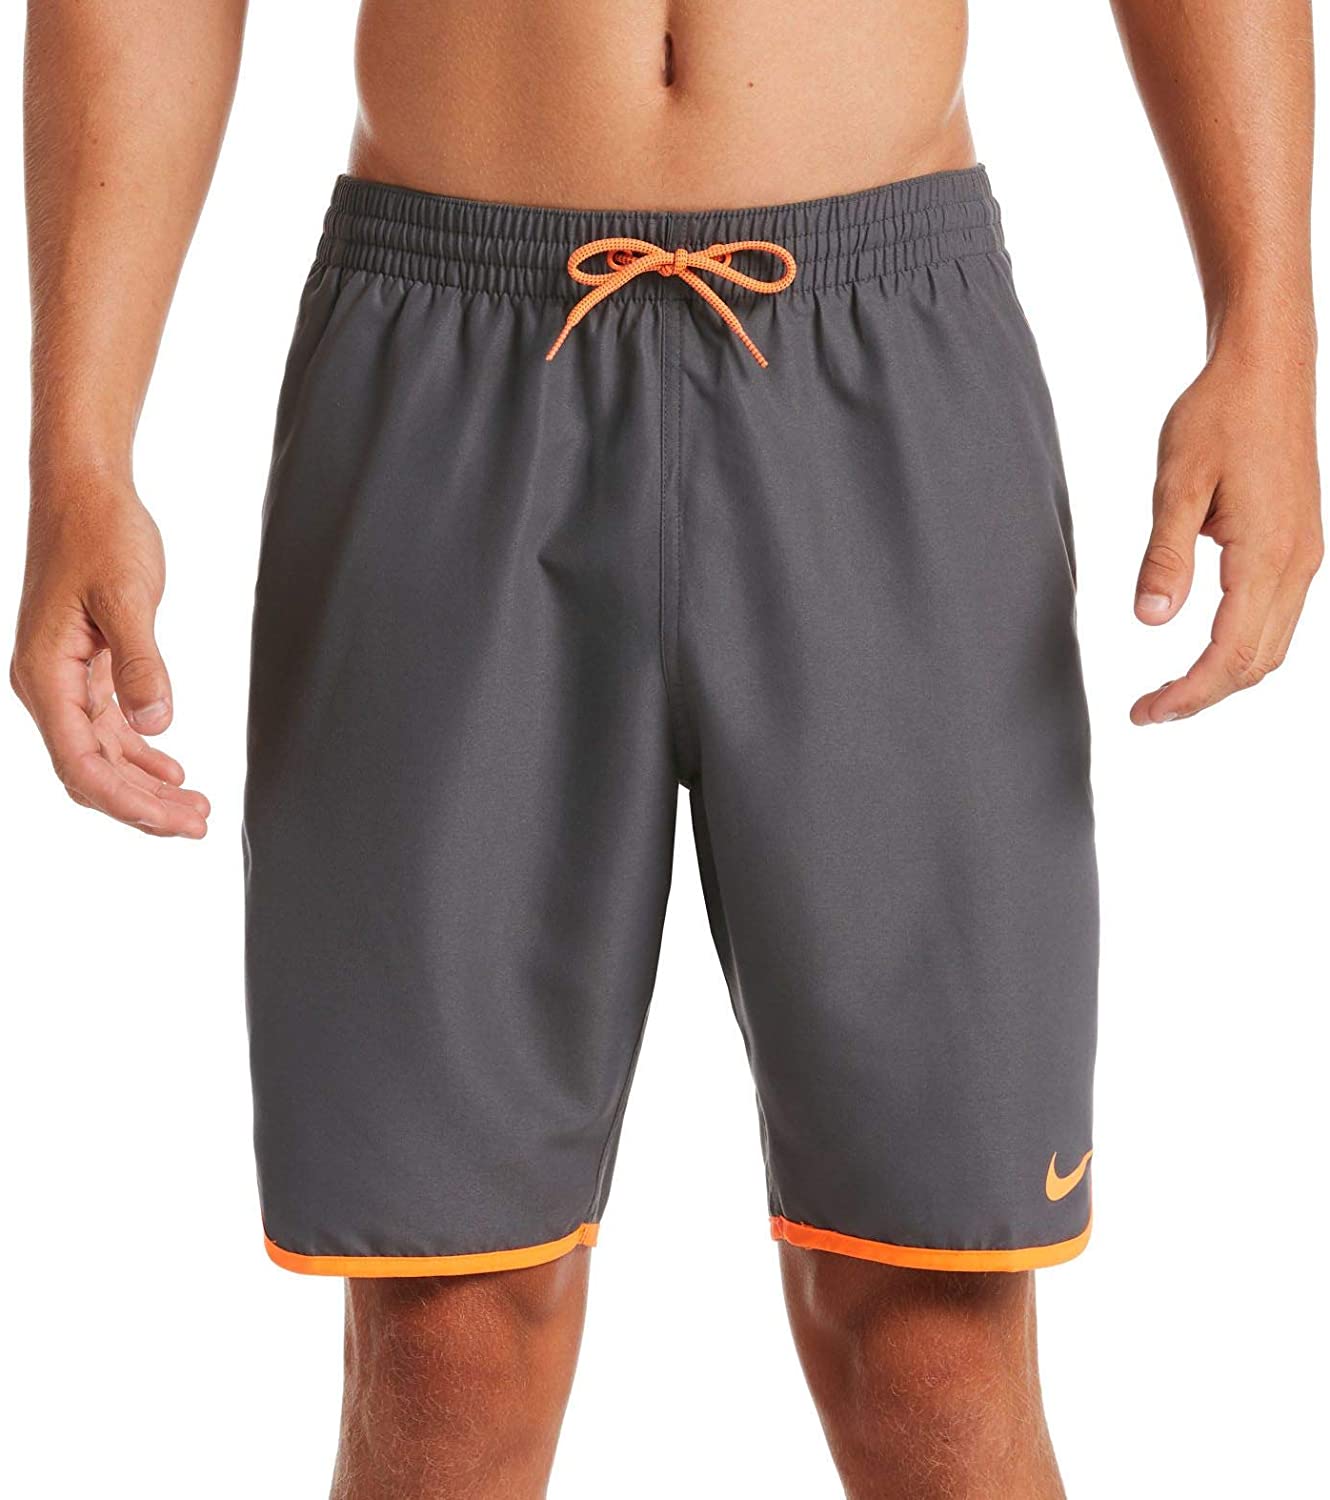 Men's Nike Diverge 9" Volley Short Swim Trunk in Iron Grey color from the front